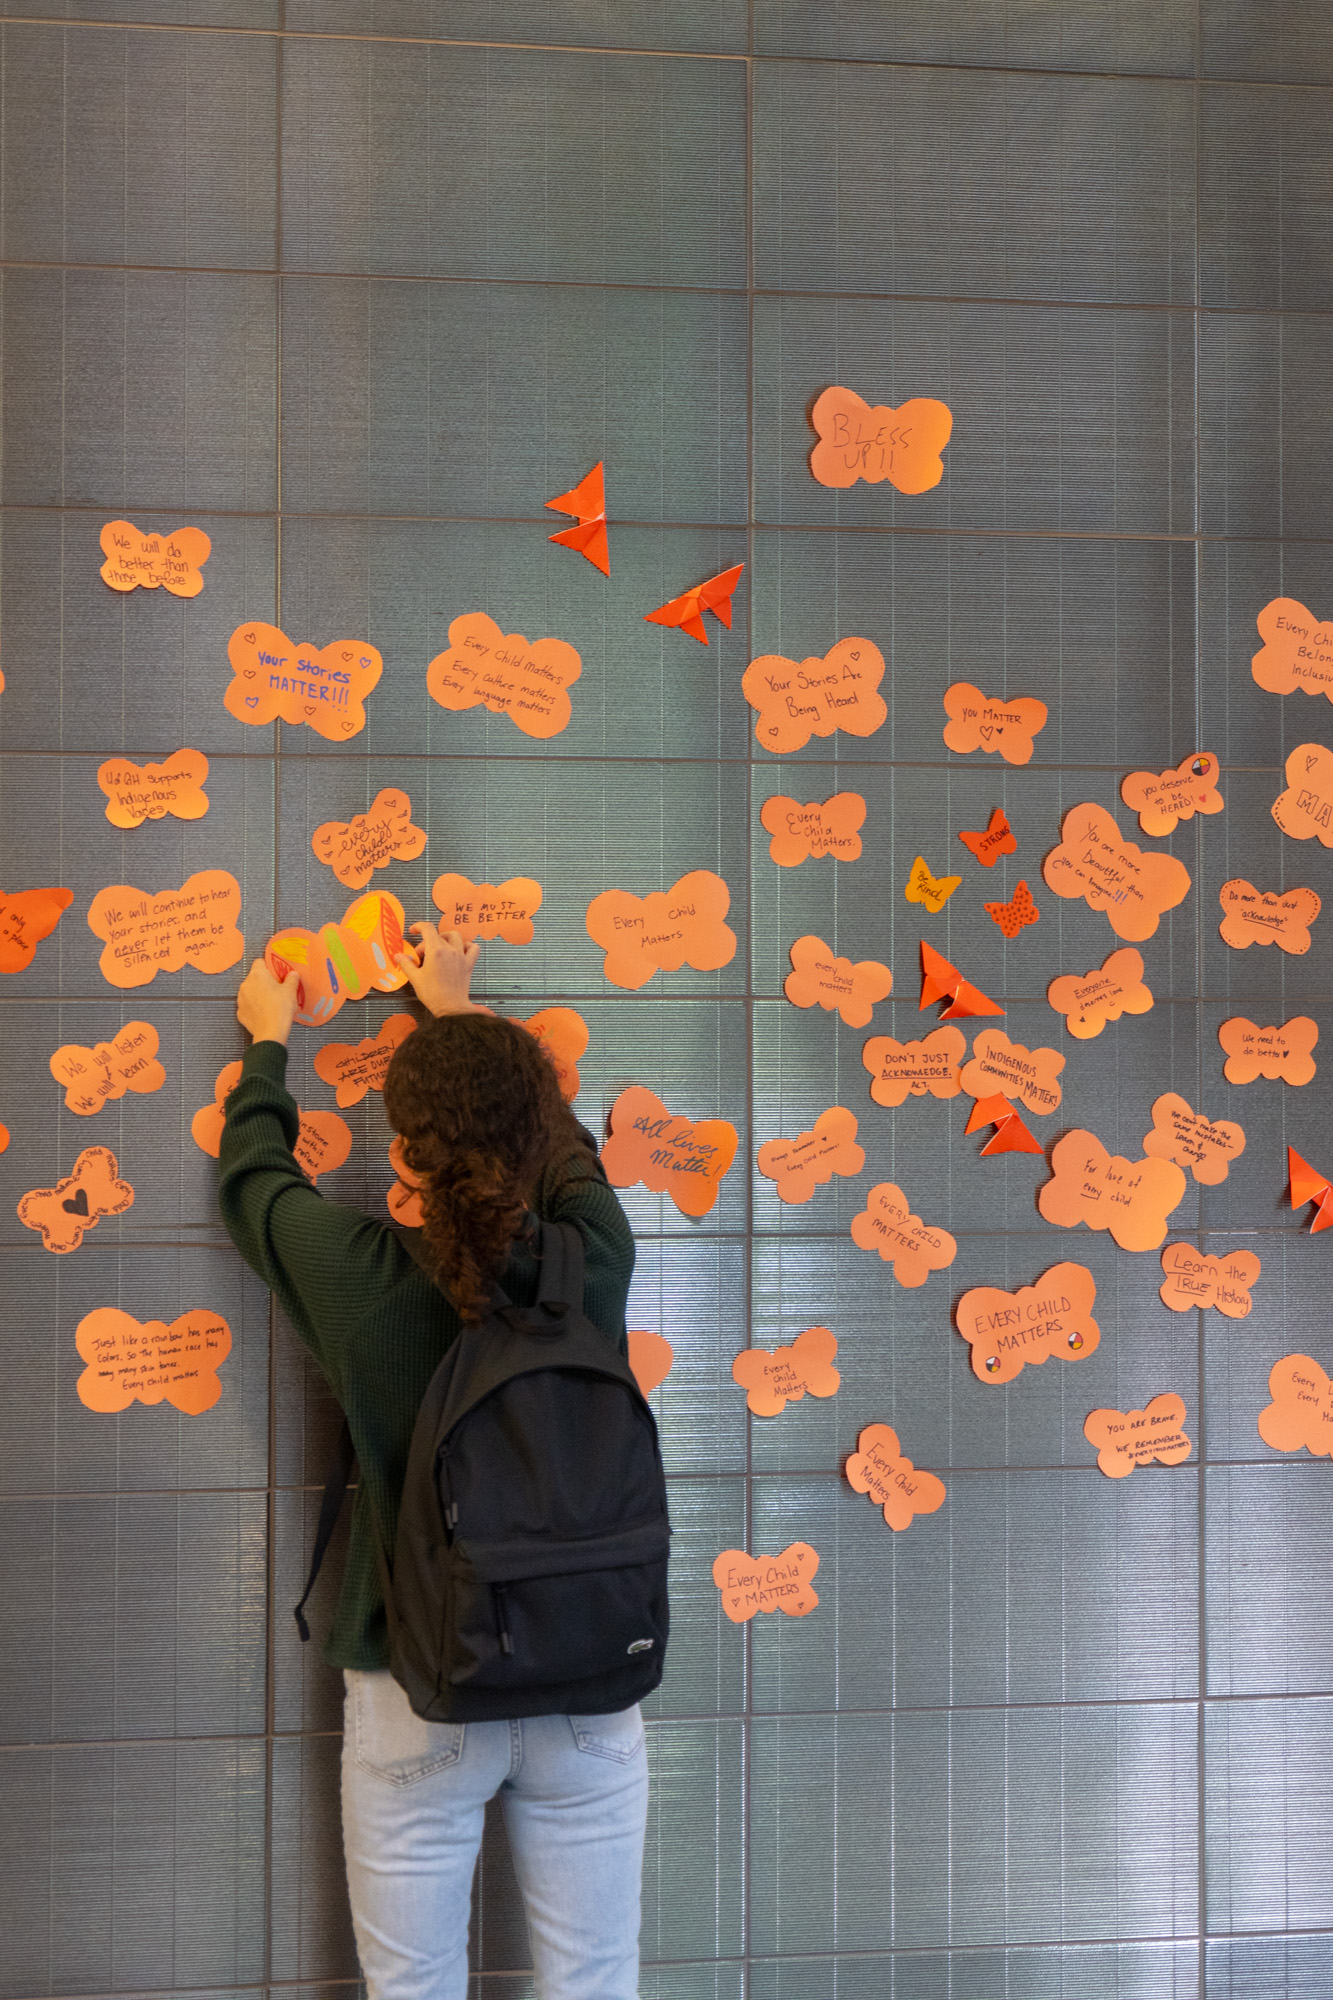 A person places an orange butterfly-shaped paper on a wall amongst other similarly shaped paper and origami